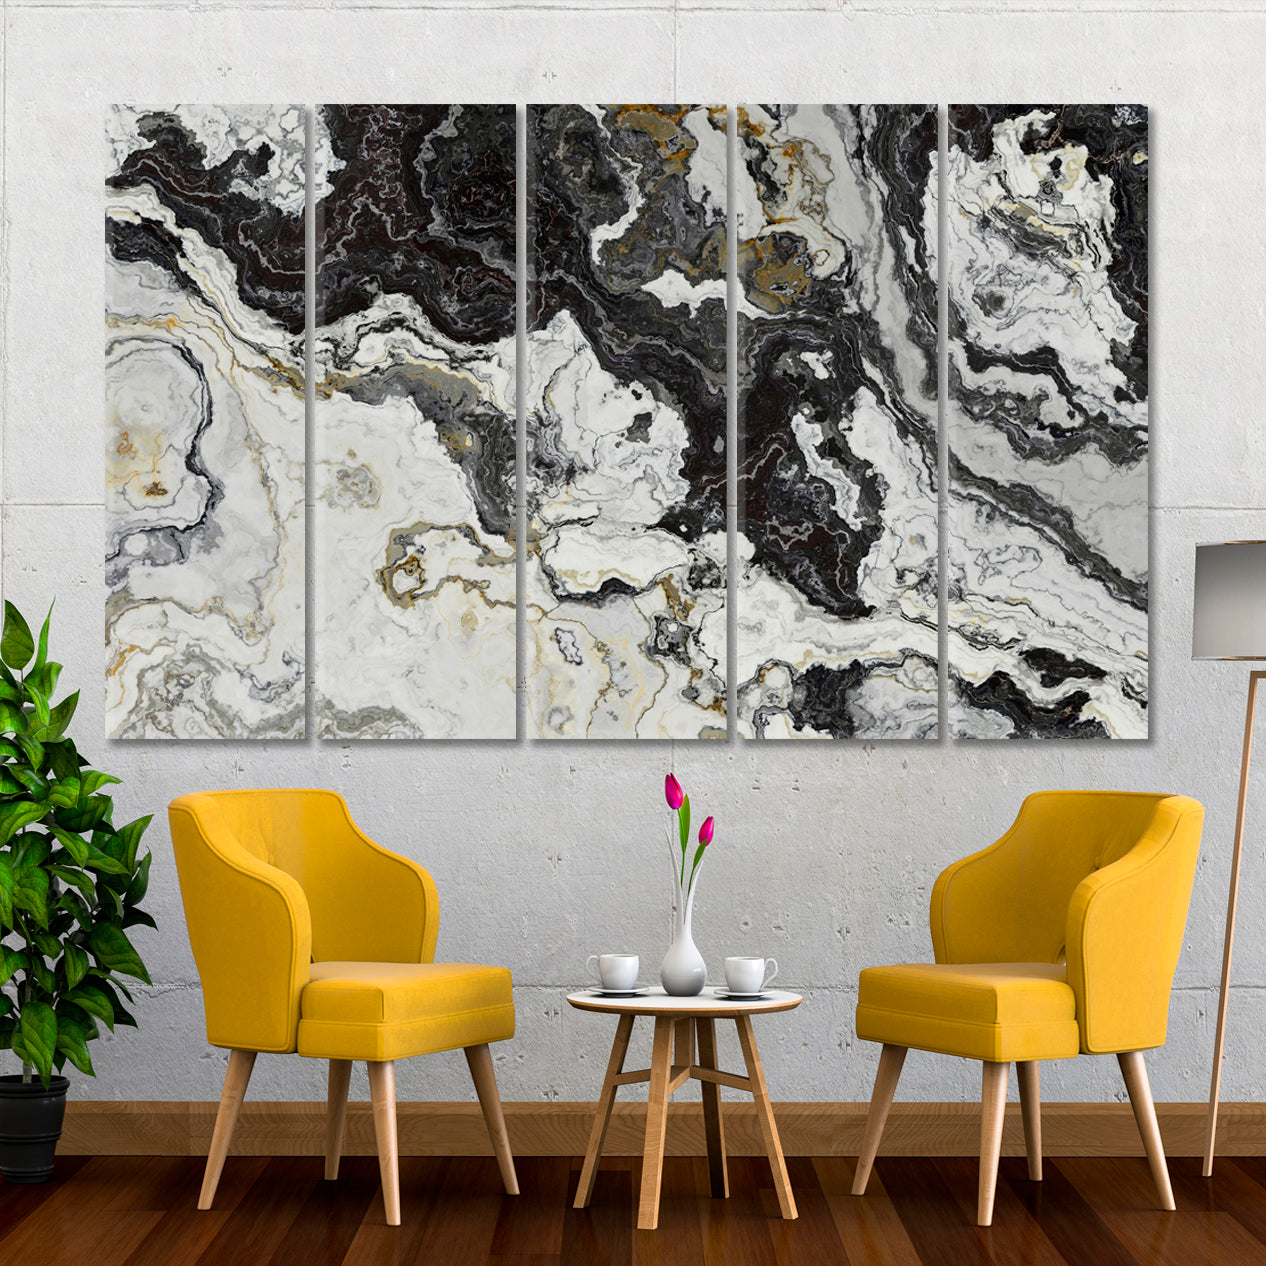 Black White Marble Pattern Curly Grey Veins Abstract Marble Oriental Art Print Canvas Artesty 5 panels 36" x 24" 